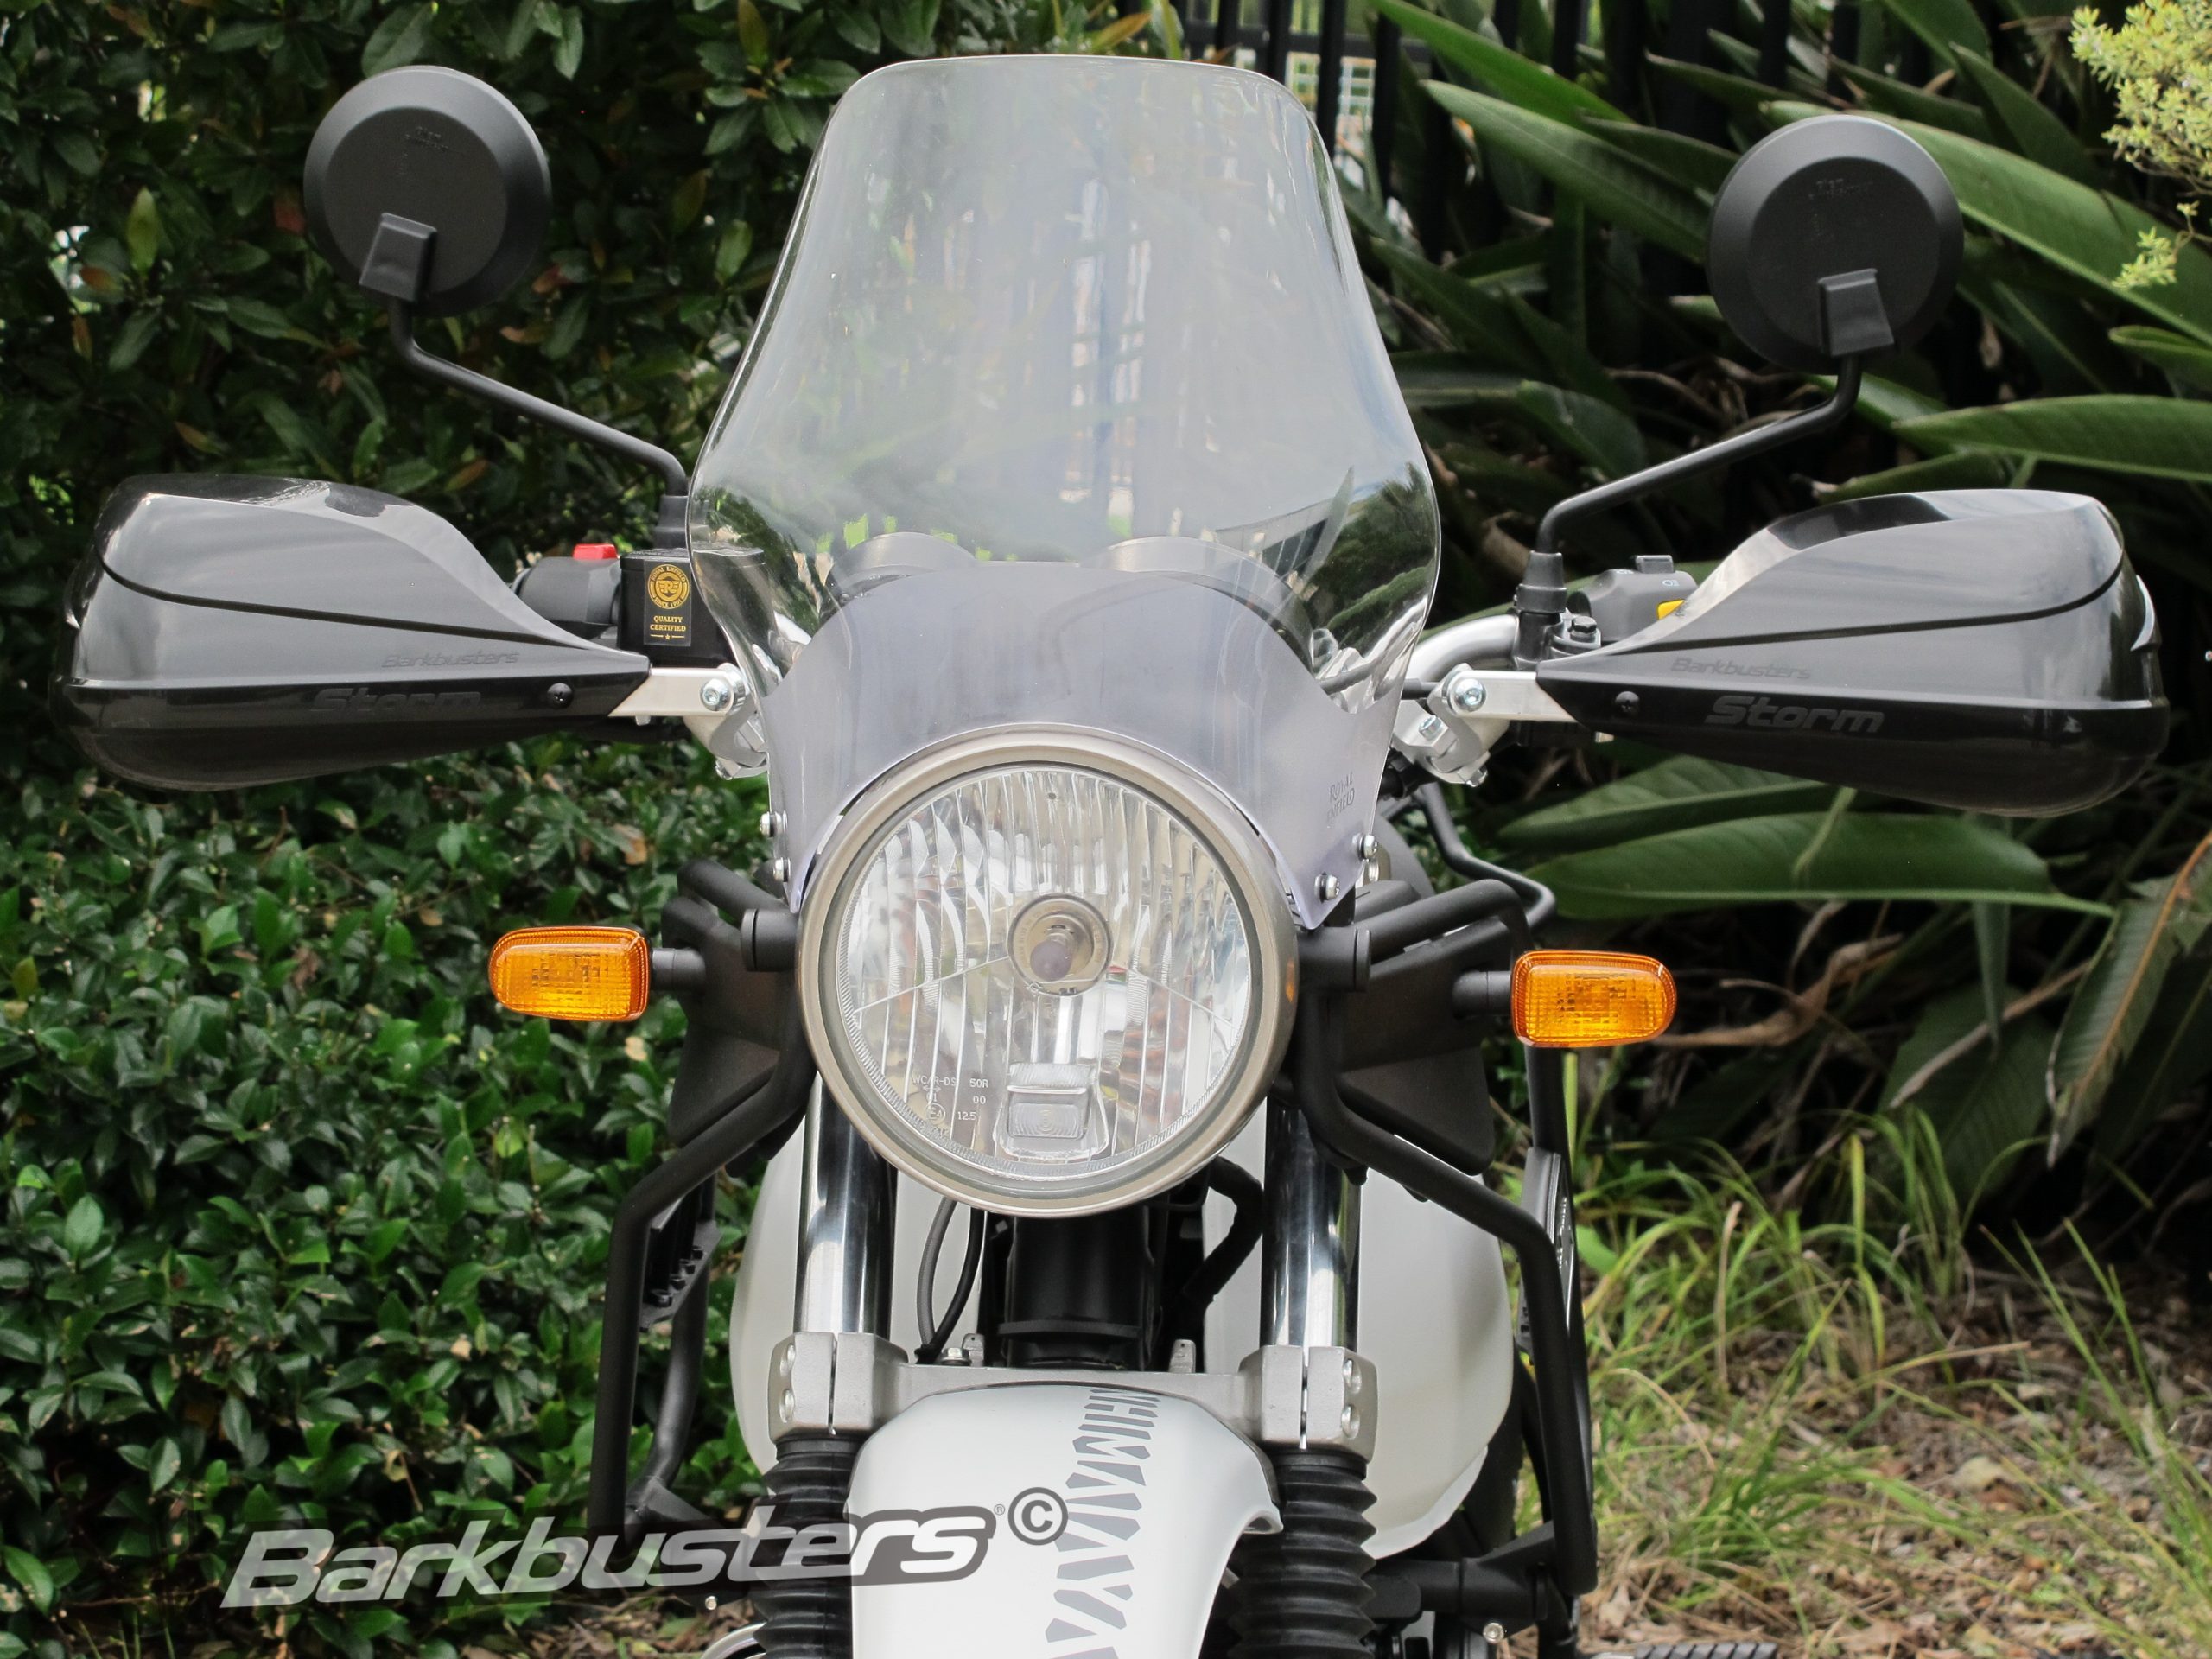 BARKBUSTERS Handguard Hardware Kit (Code: BHG-084) fitted to ROYAL ENFIELD Himalayan with STORM guards (Code: STM-003) sold separately